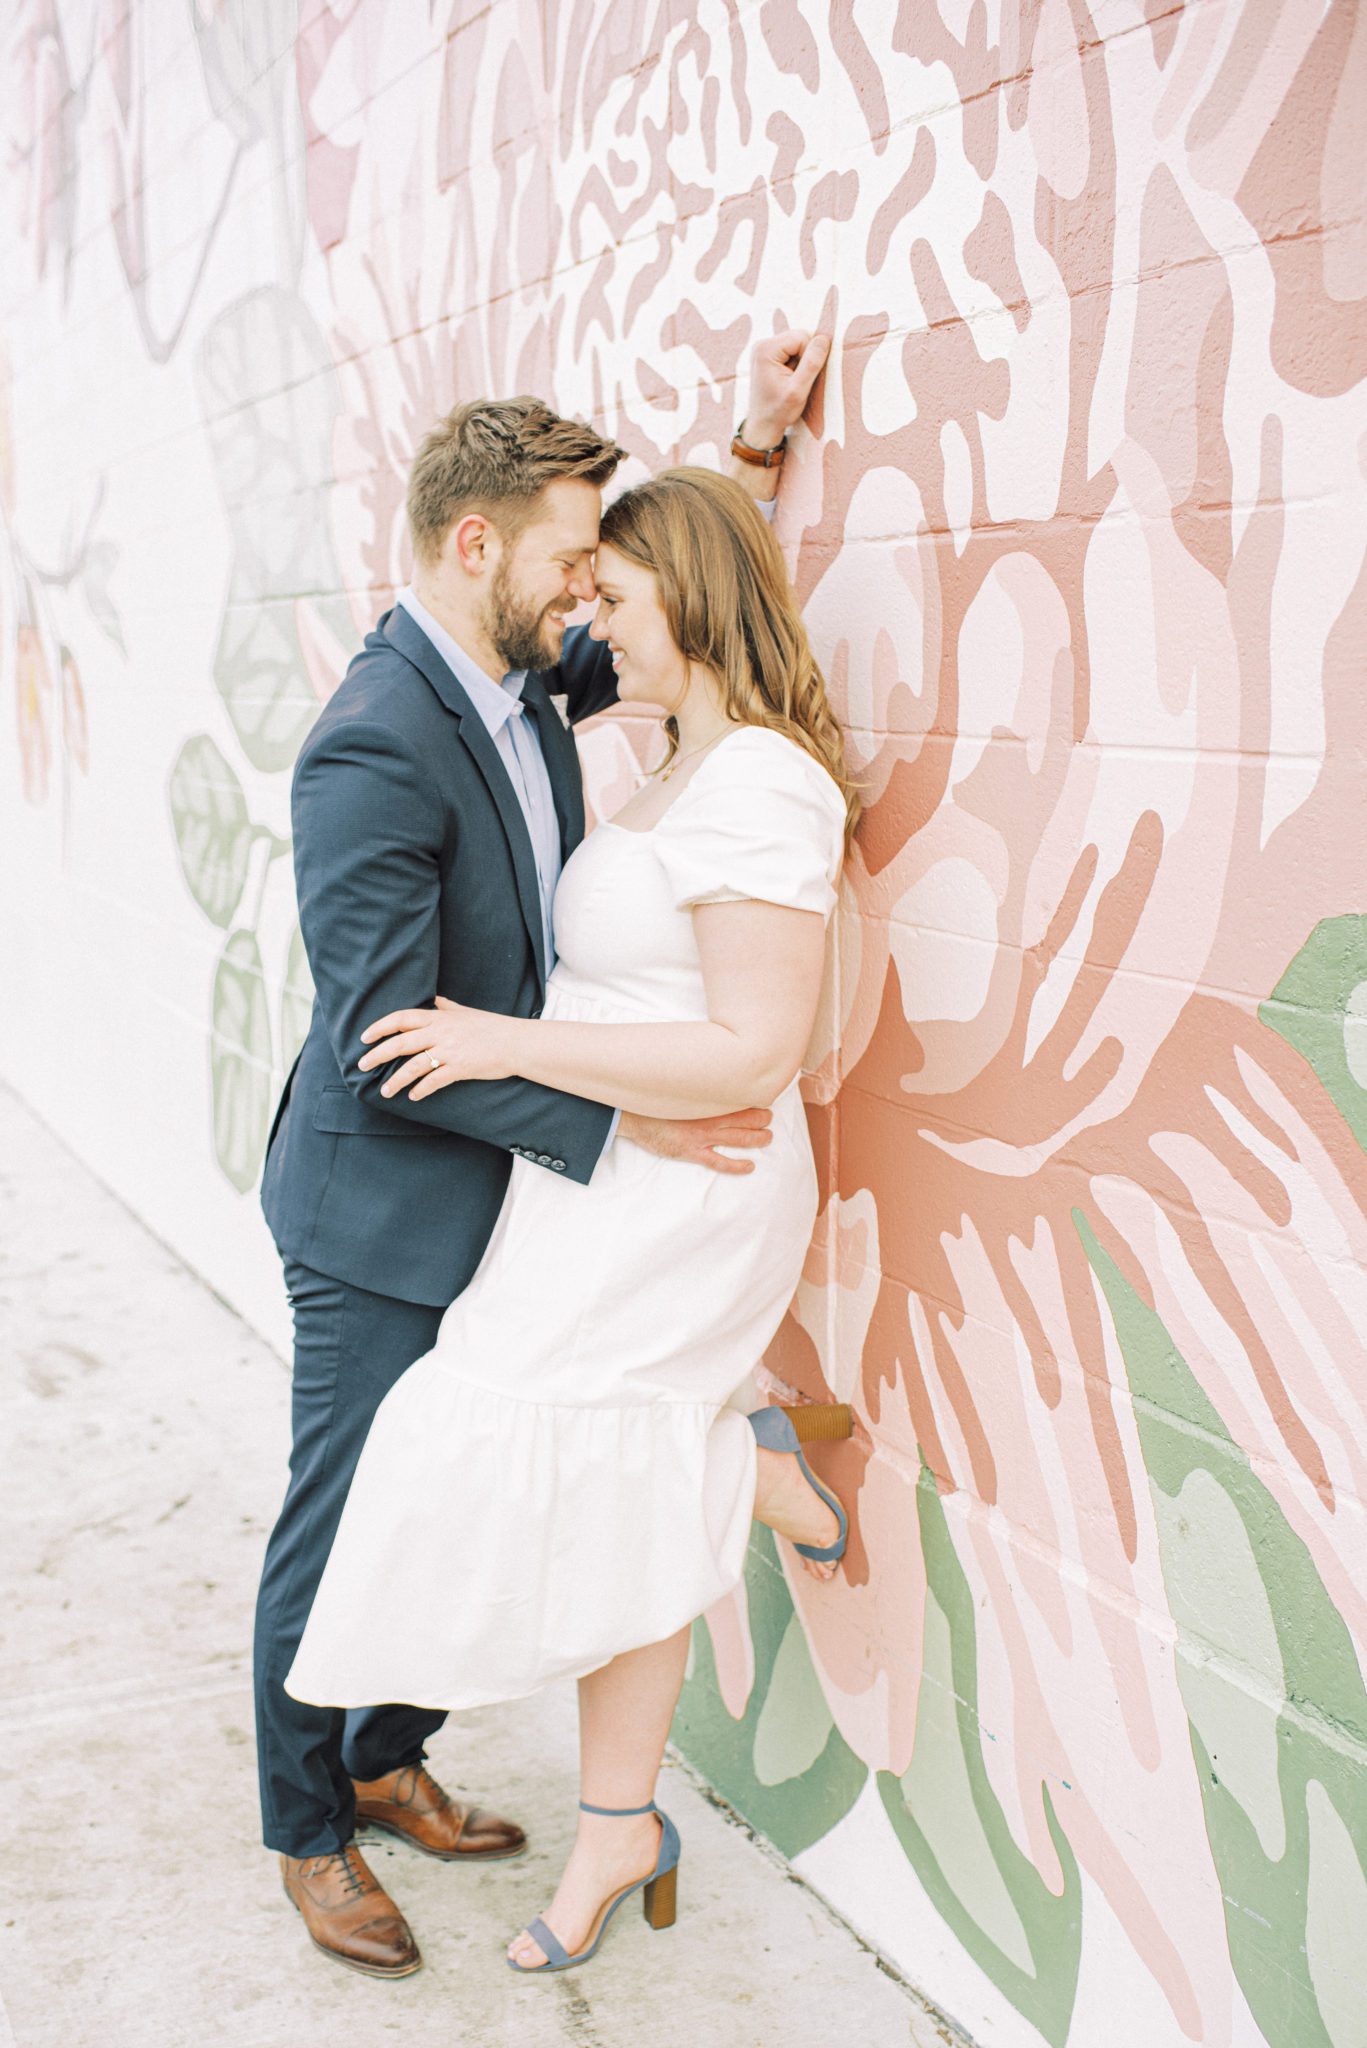 Floral inspired pink mural in Edmonton Alberta perfect for spring-inspired engagement photos